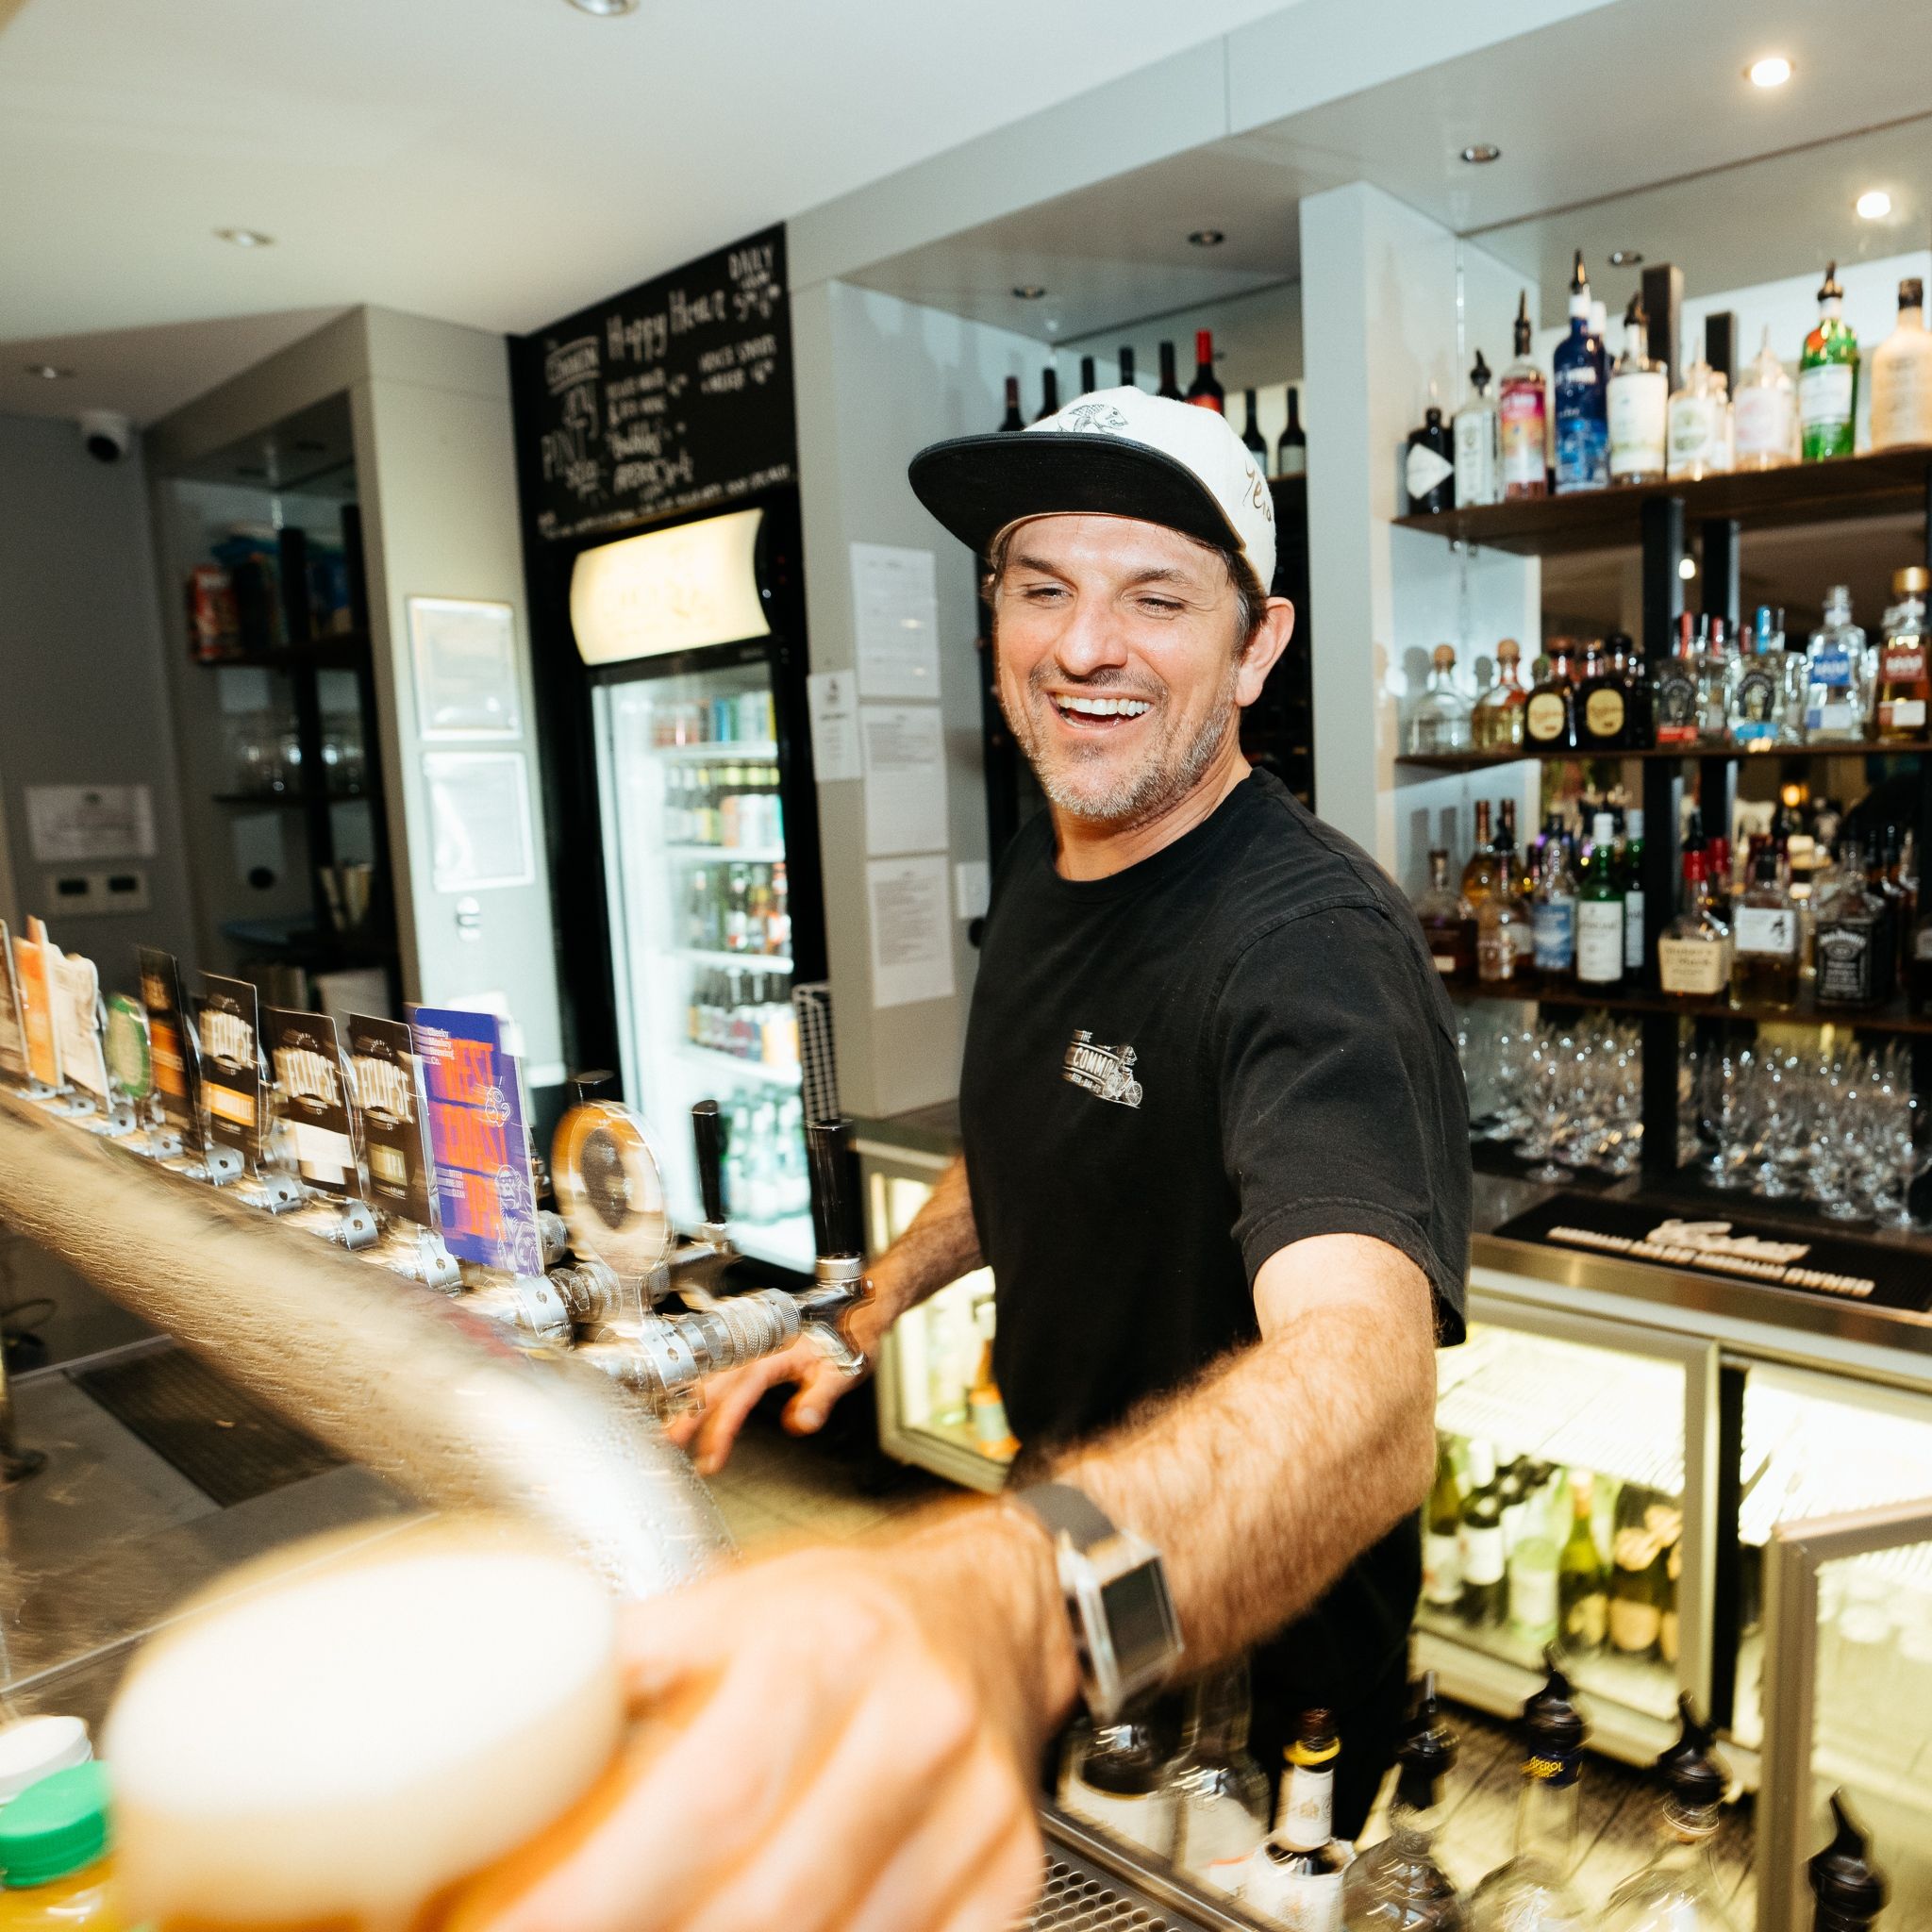 Tony behind the bar at The Common, in Prevally Margaret River